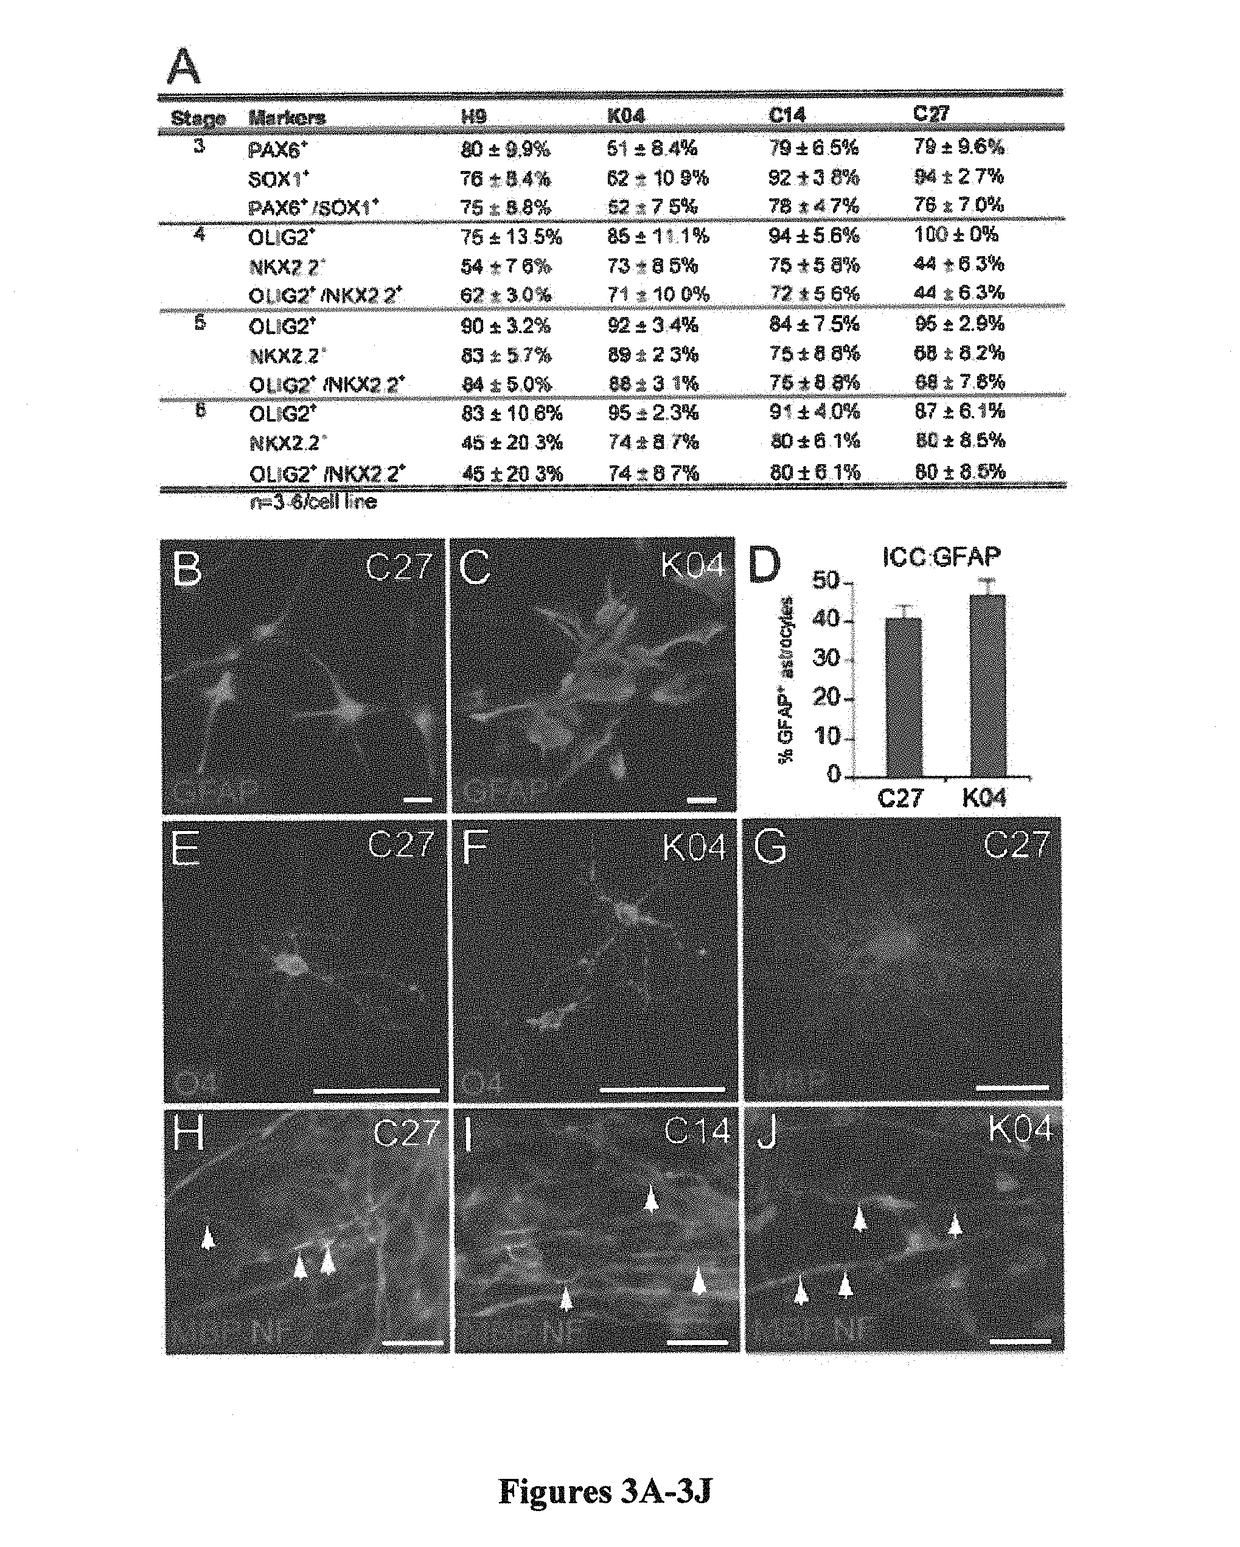 Induced pluripotent cell-derived oligodendrocyte progenitor cells for the treatment of myelin disorders